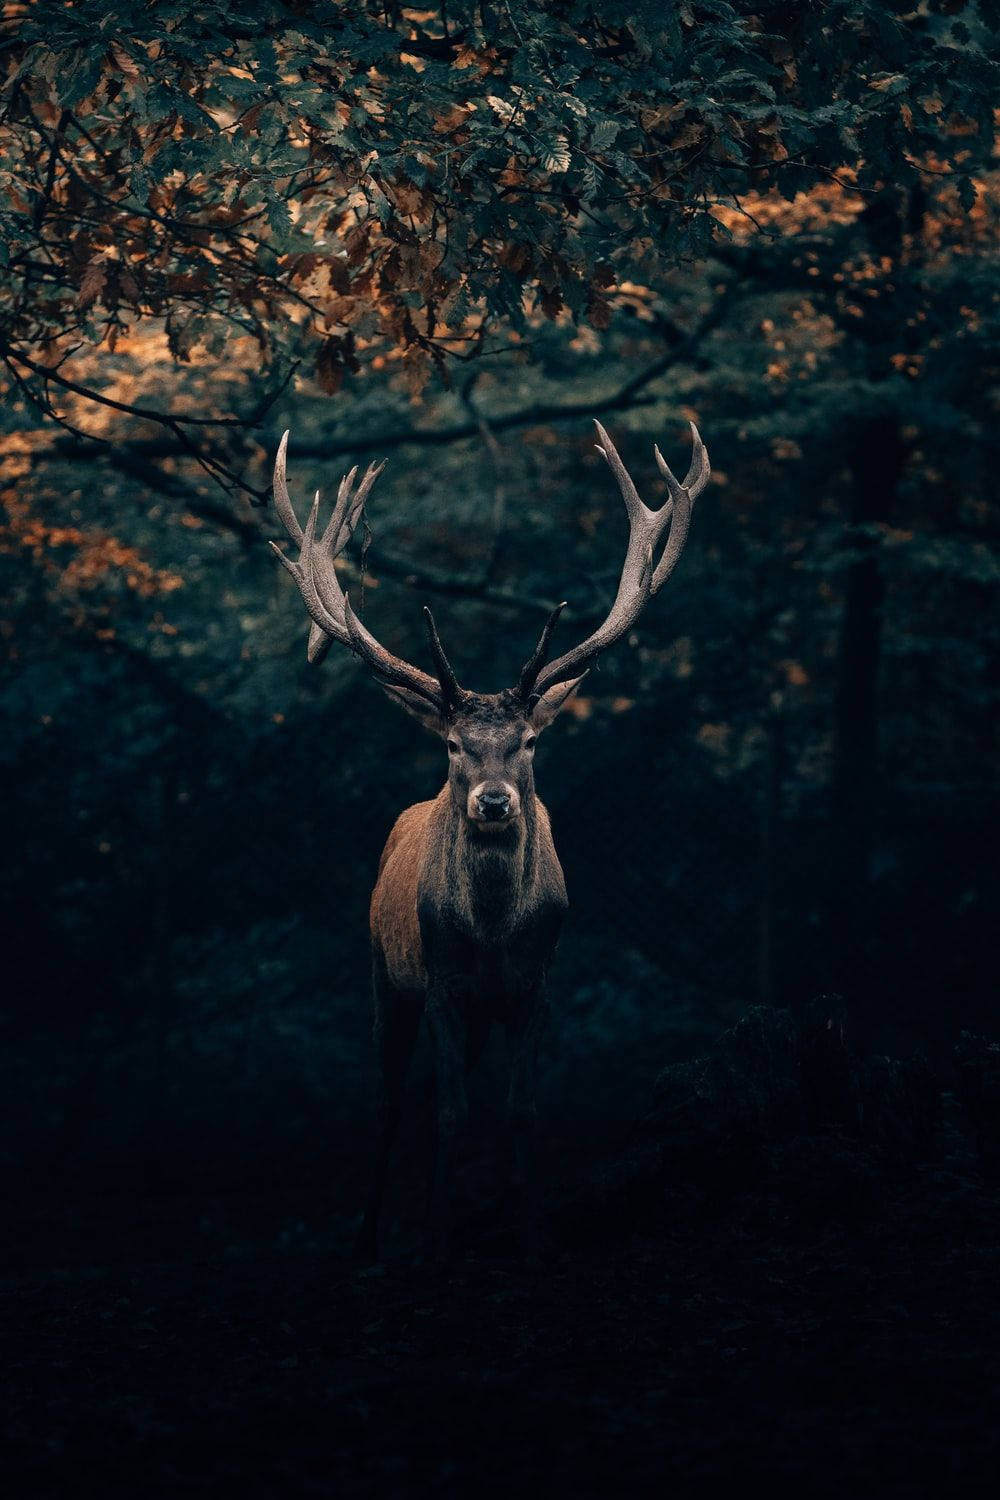 A majestic Big Buck Deer standing in the forest at night. Wallpaper